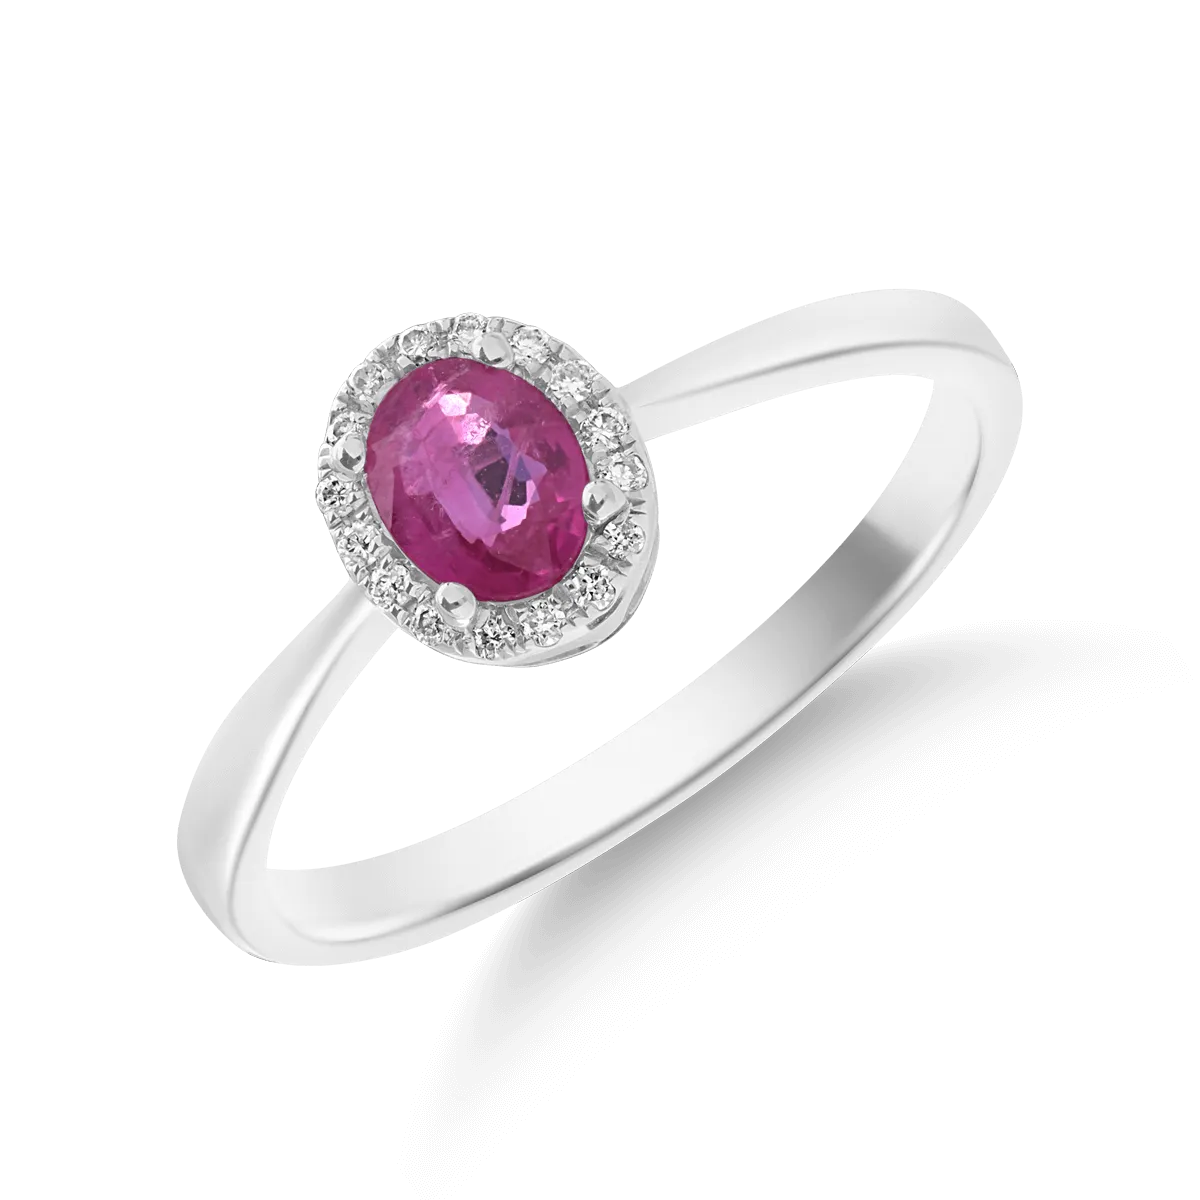 18K white gold ring with 0.5ct ruby and 0.05ct diamonds